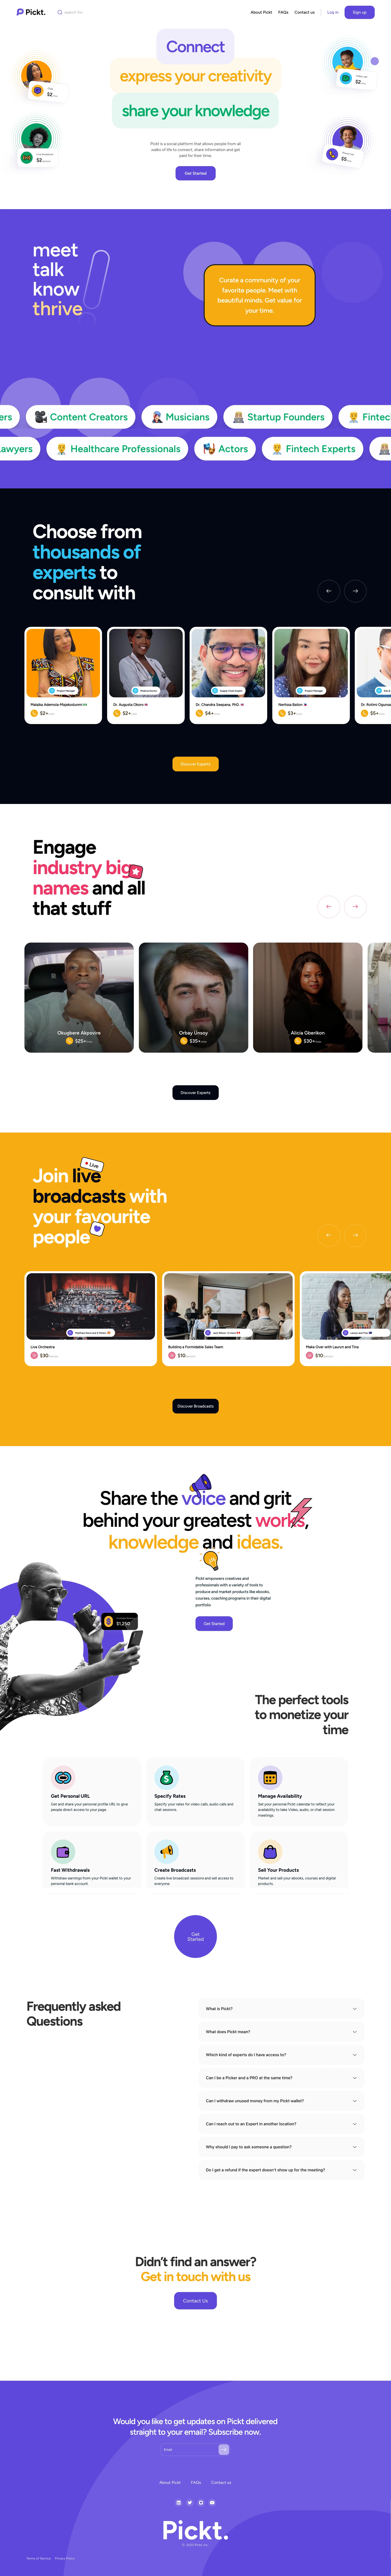 Pickt. Landing Page Example: Connect, express your creativity, and share your knowledge. Pickt is a social platform that allows people from all walks of life to connect, share information and get paid for their time.